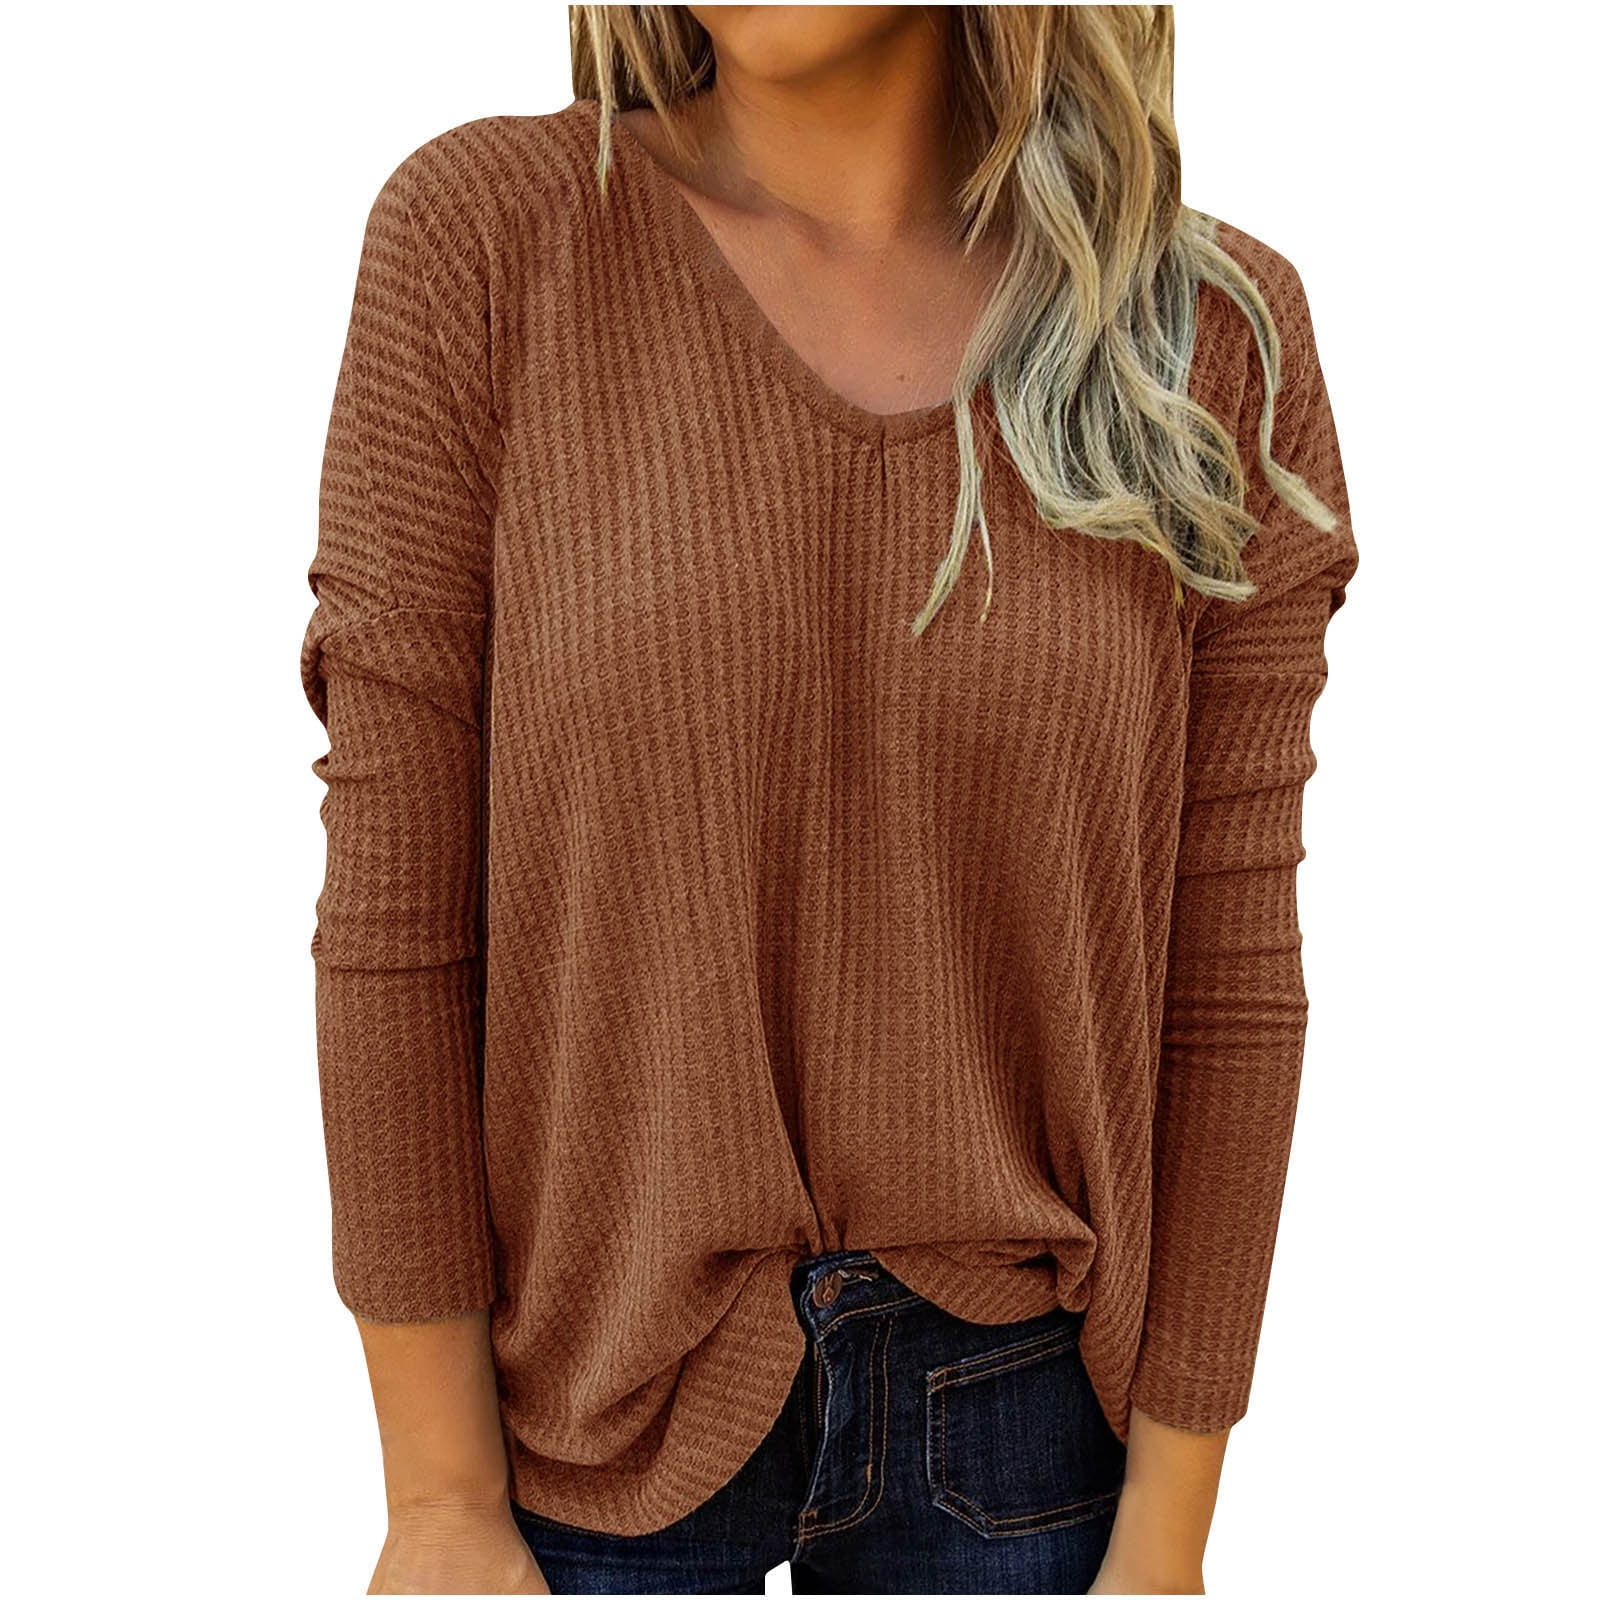 Buy Women Knitted Tops, Long Sleeve Knitted Tops V Neck Casual for